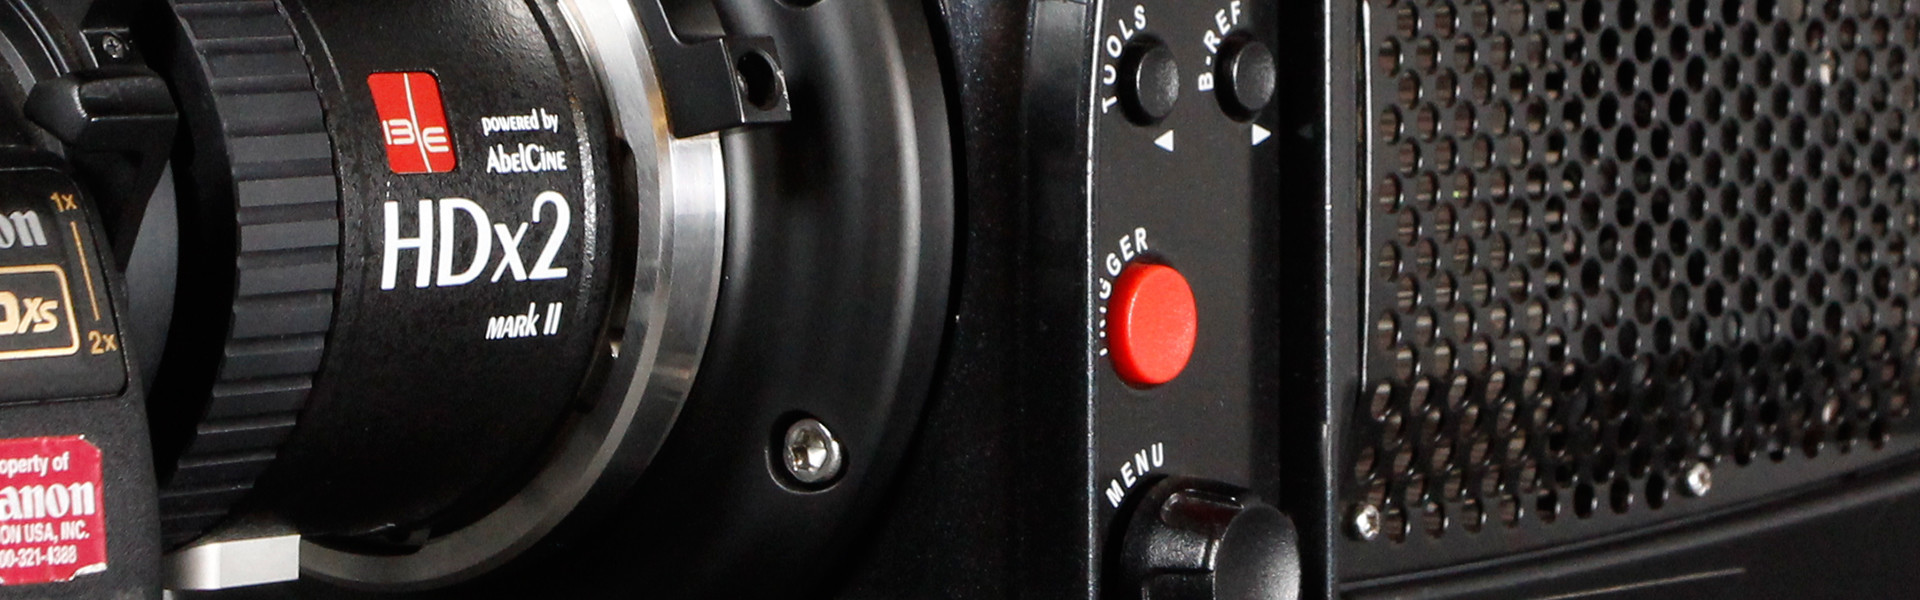 Header image for article HDx Optical Adapter Compatibility